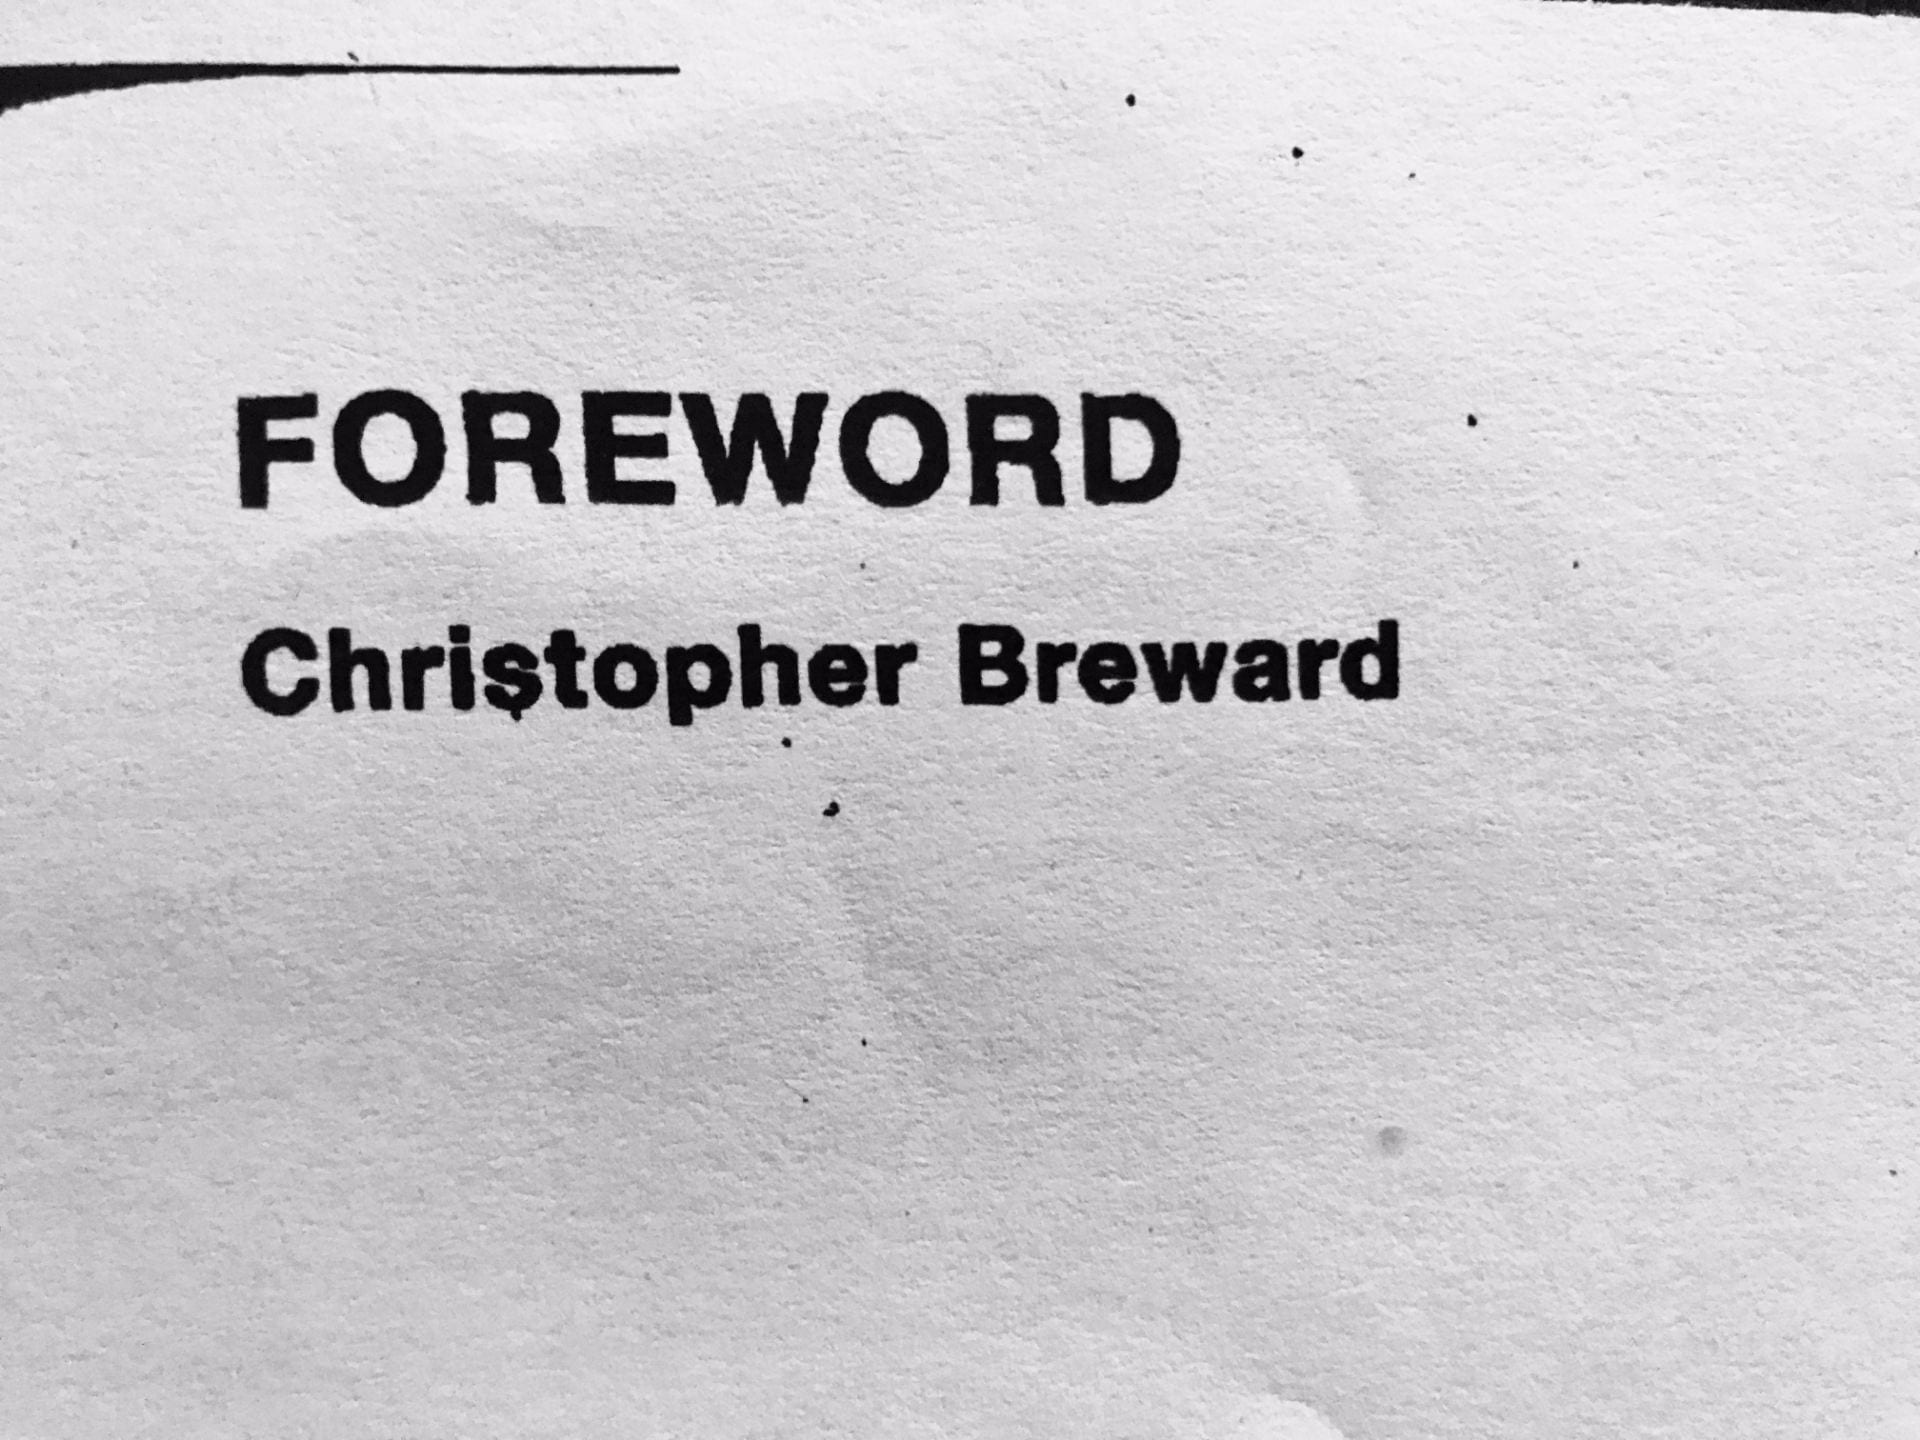 Christopher Breward ‘Foreword’ – Reflection for 2 of the 10 Aphorisms